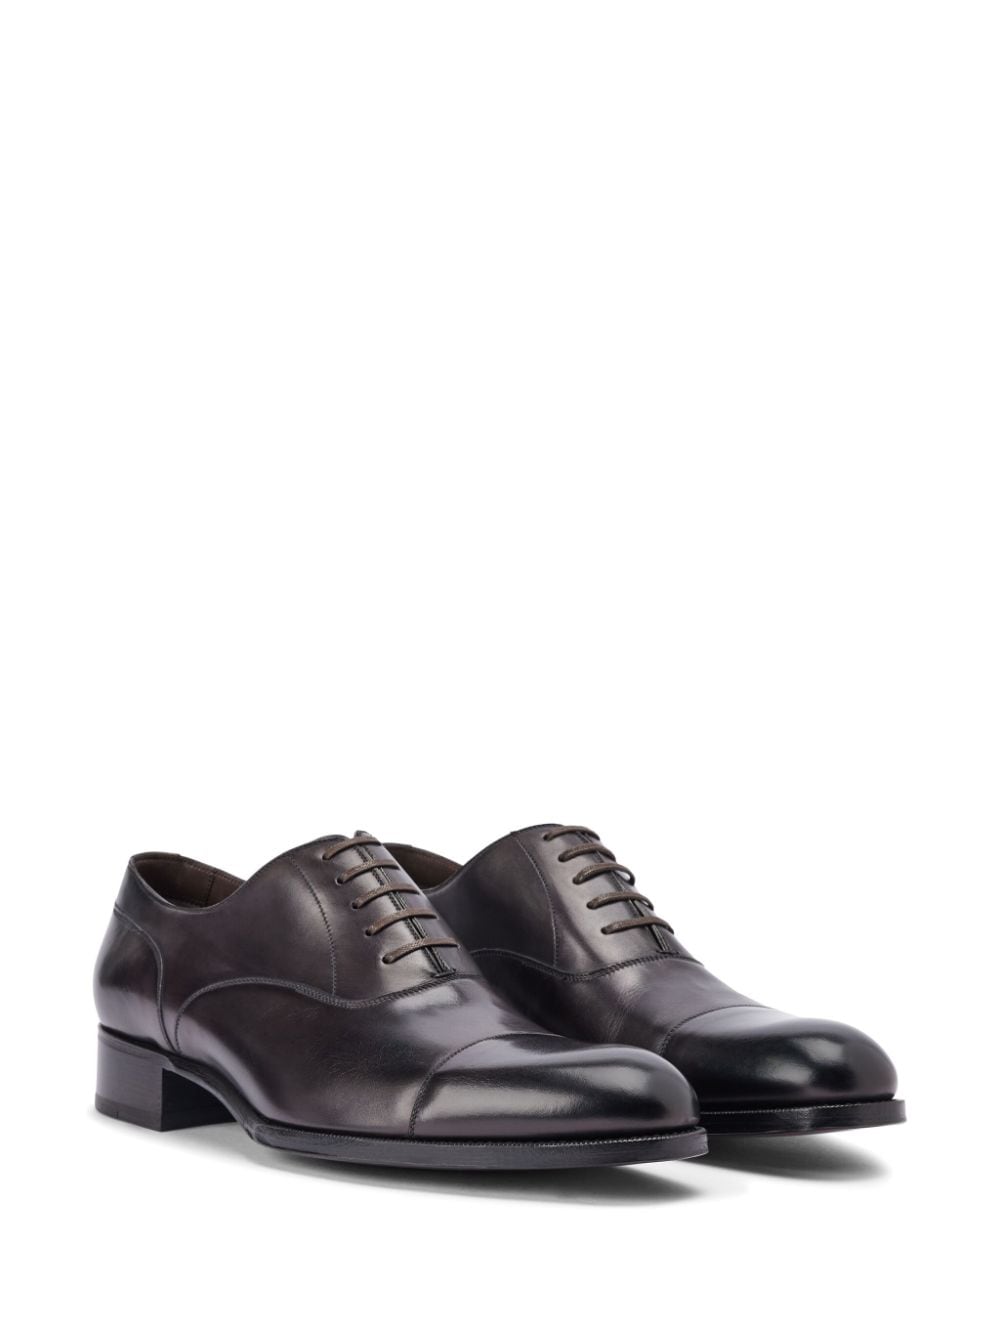 Image 2 of TOM FORD leather Oxford shoes